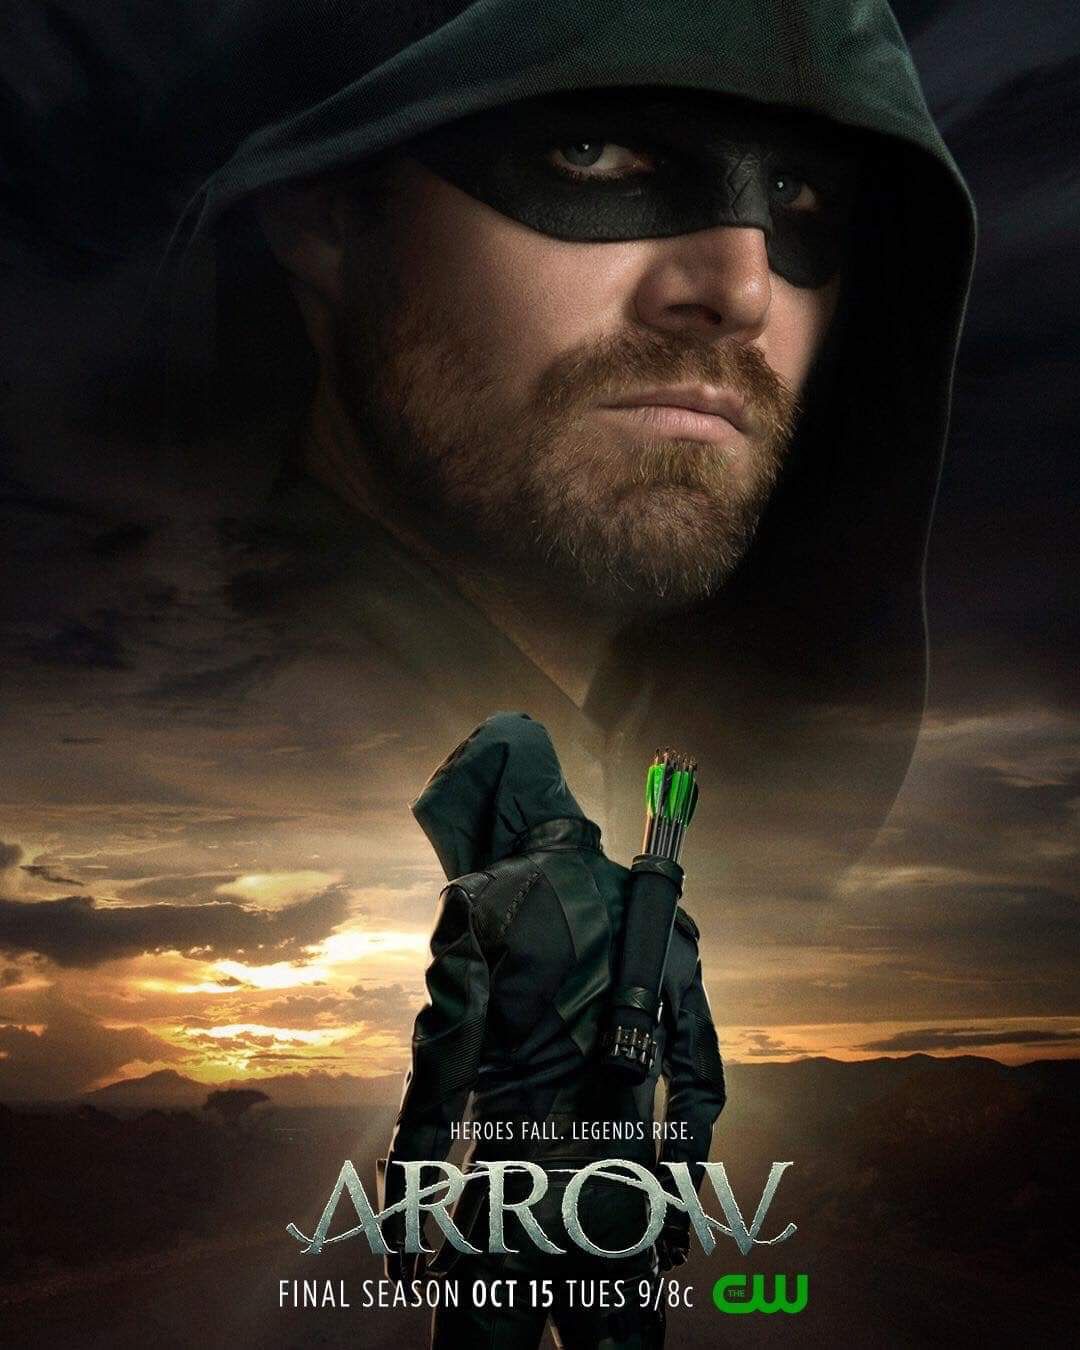 Stephen Amell as Oliver Queen in the CW's Arrow Final Season Poster